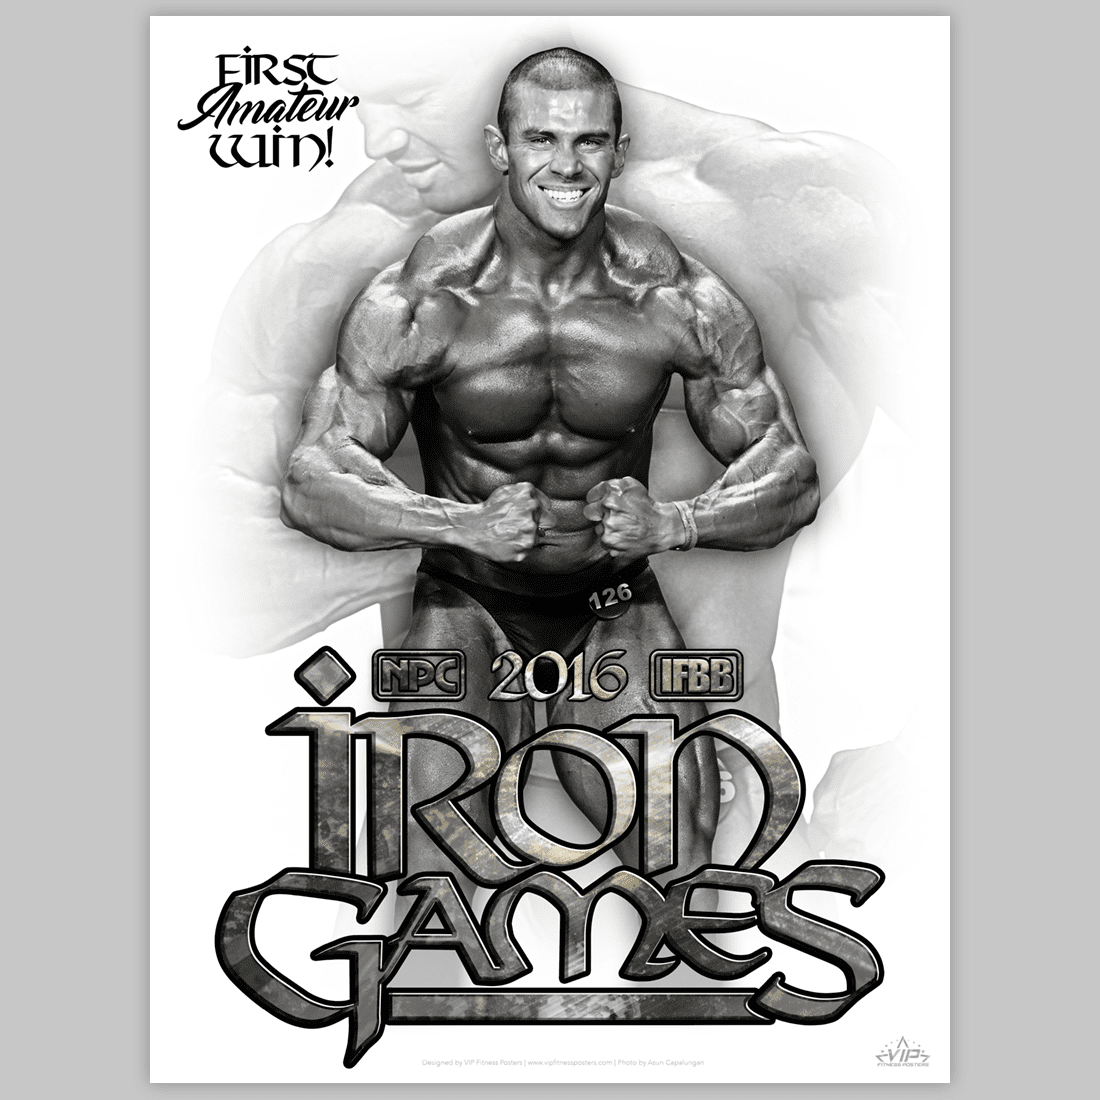 This one-of-a-kind fitness poster can be customized for any fitness competitor looking to celebrate their appearance in their Fitness Contest.